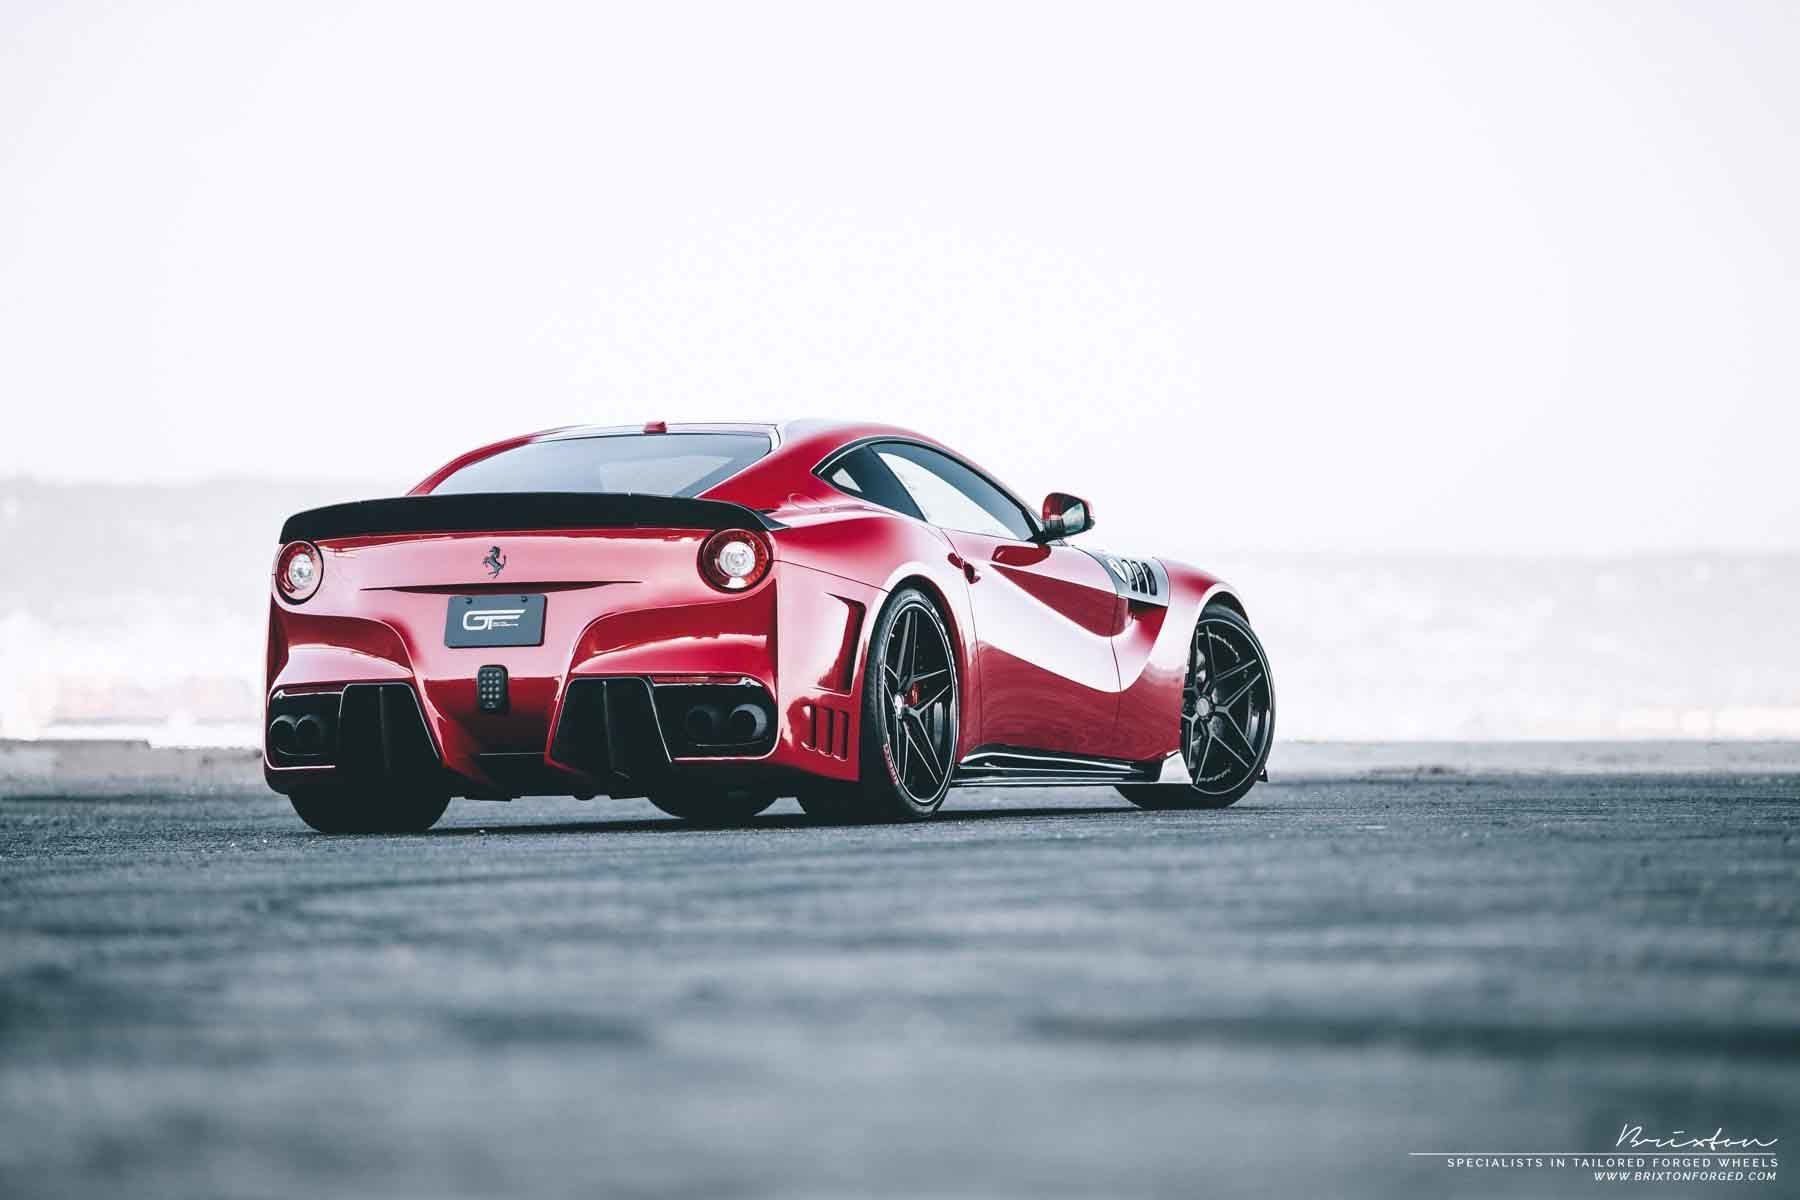 images-products-1-2444-232974732-red-ferrari-f12-berlinetta-svr-kit-brixton-forged-wr7-targa-series-forged-wheels-3-piece-concave.jpg